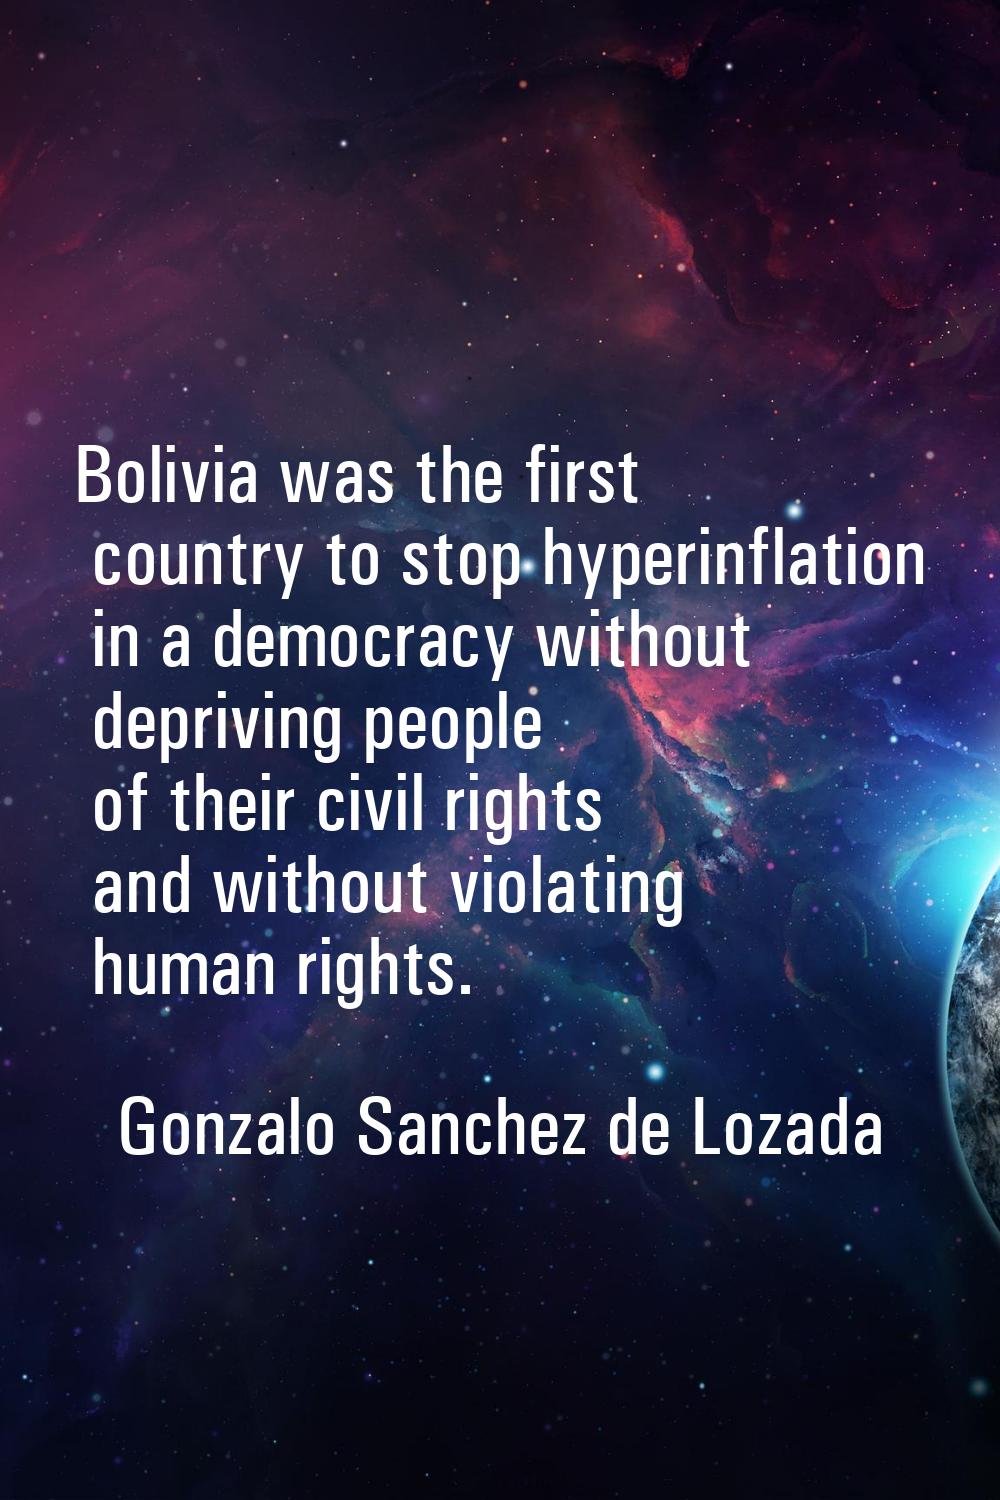 Bolivia was the first country to stop hyperinflation in a democracy without depriving people of the